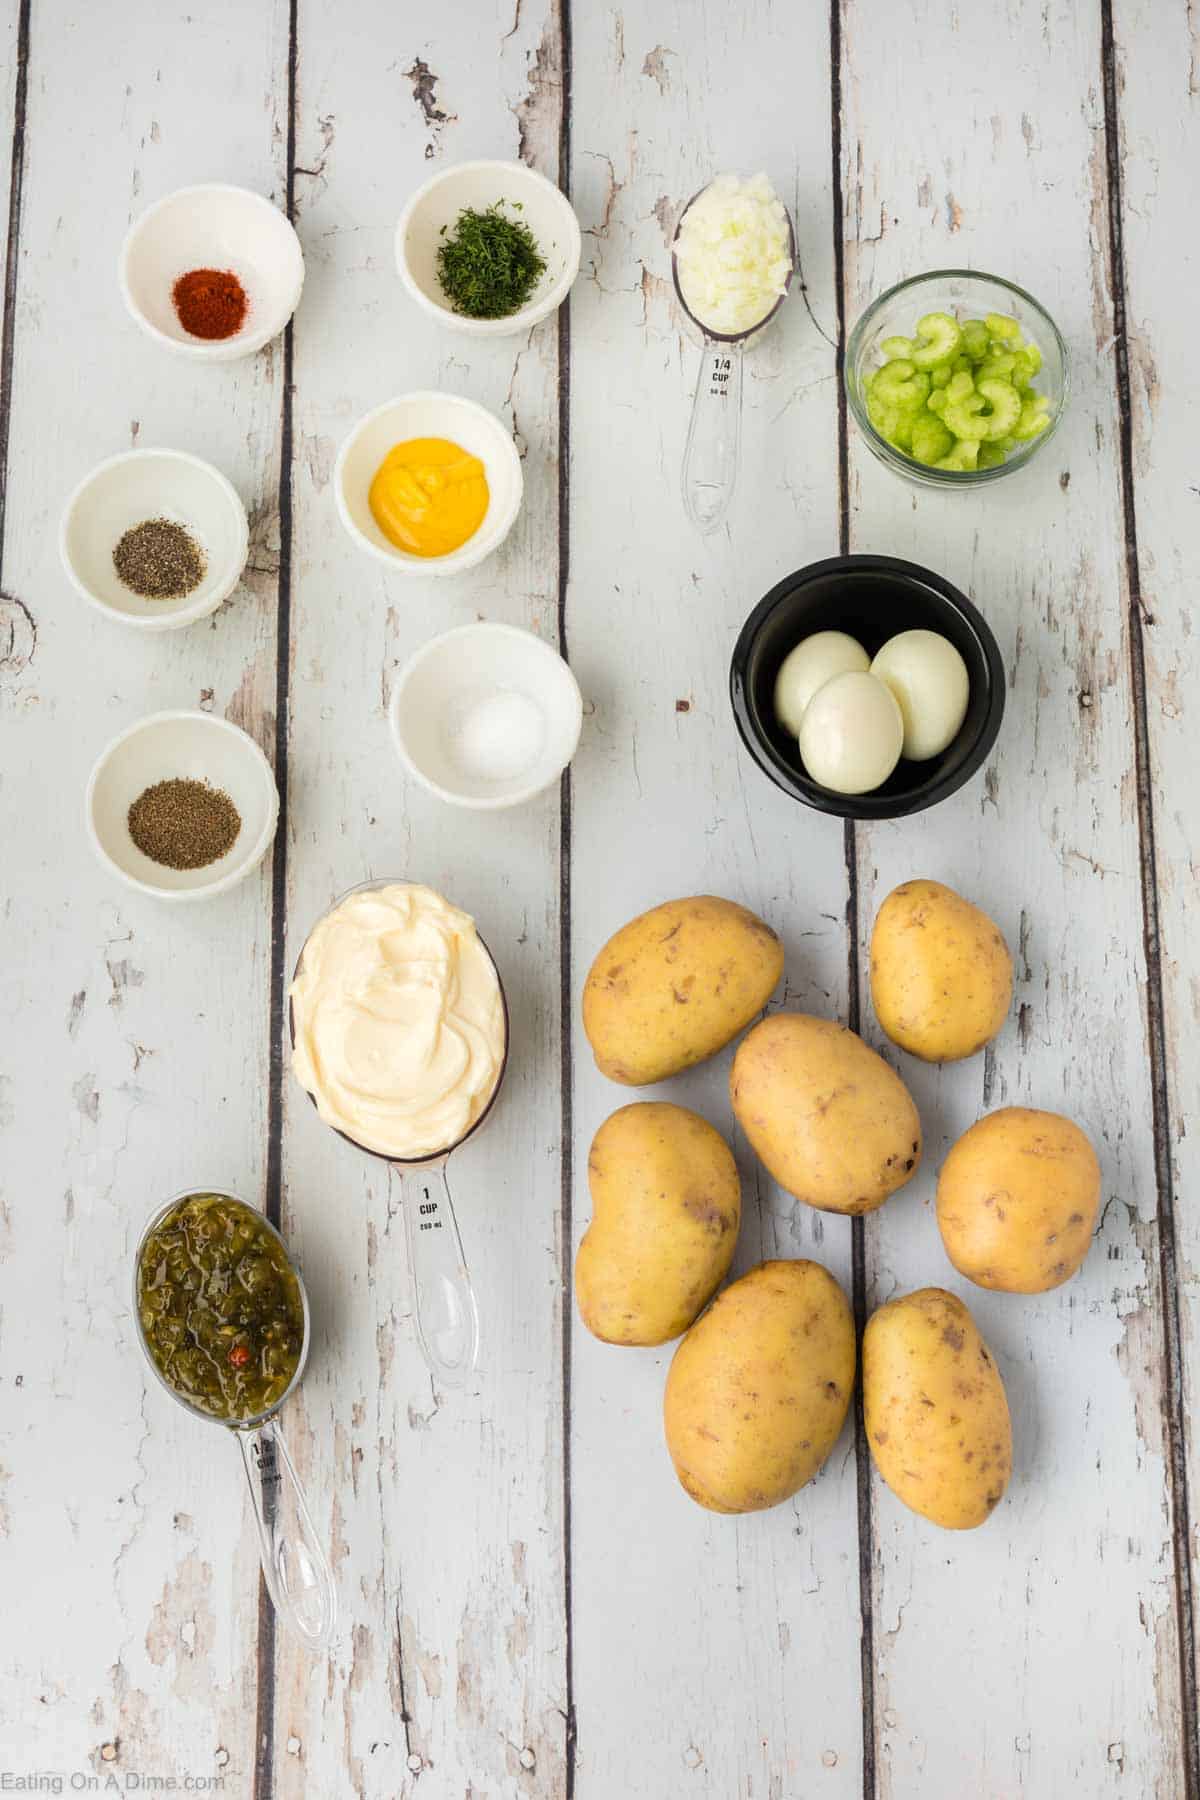 Ingredients - yukon gold potatoes, mayonnaise, sweet pickle relish, yellow mustard, celery seeds, paprika, boiled eggs, celery, sweet onion, chopped dill, salt and pepper